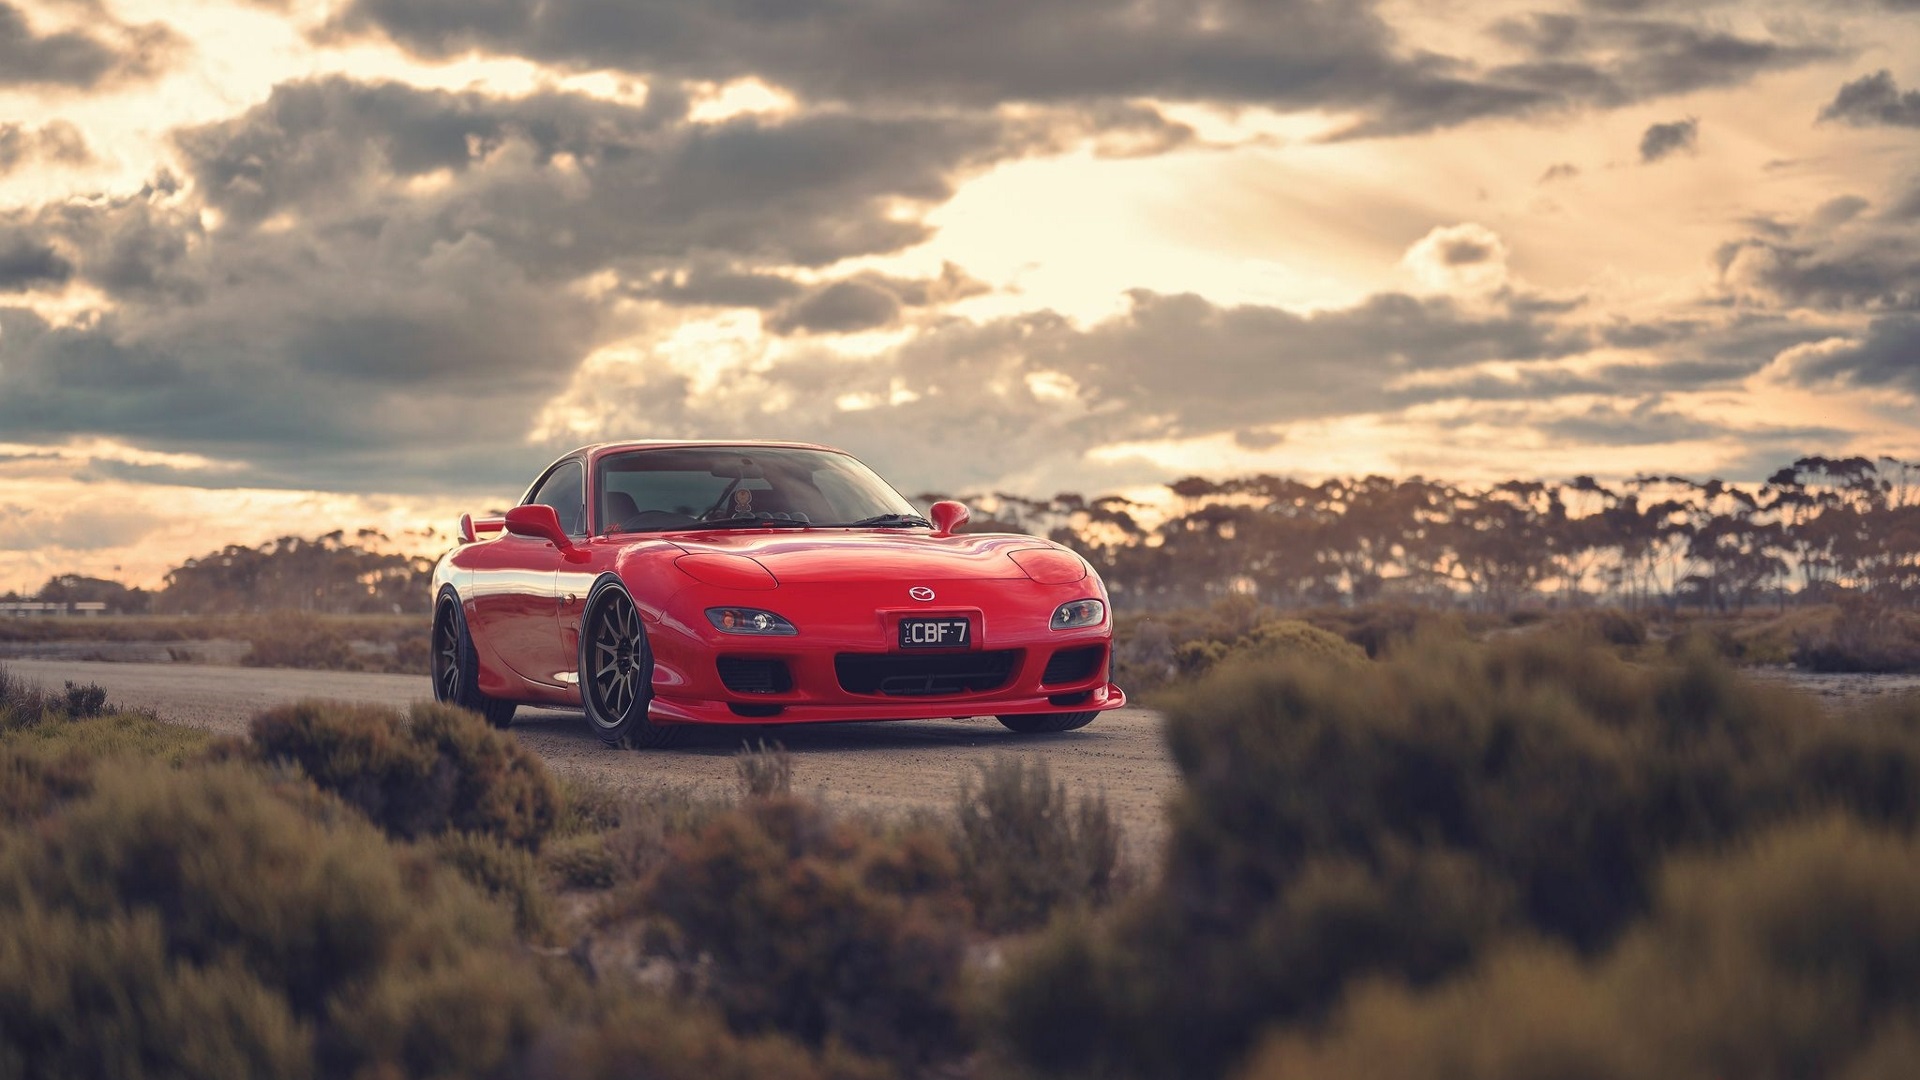 General 1920x1080 Mazda RX-7 Mazda Japanese cars red cars car vehicle sports car sky clouds sunset bushes trees pop-up headlights outdoors PT works